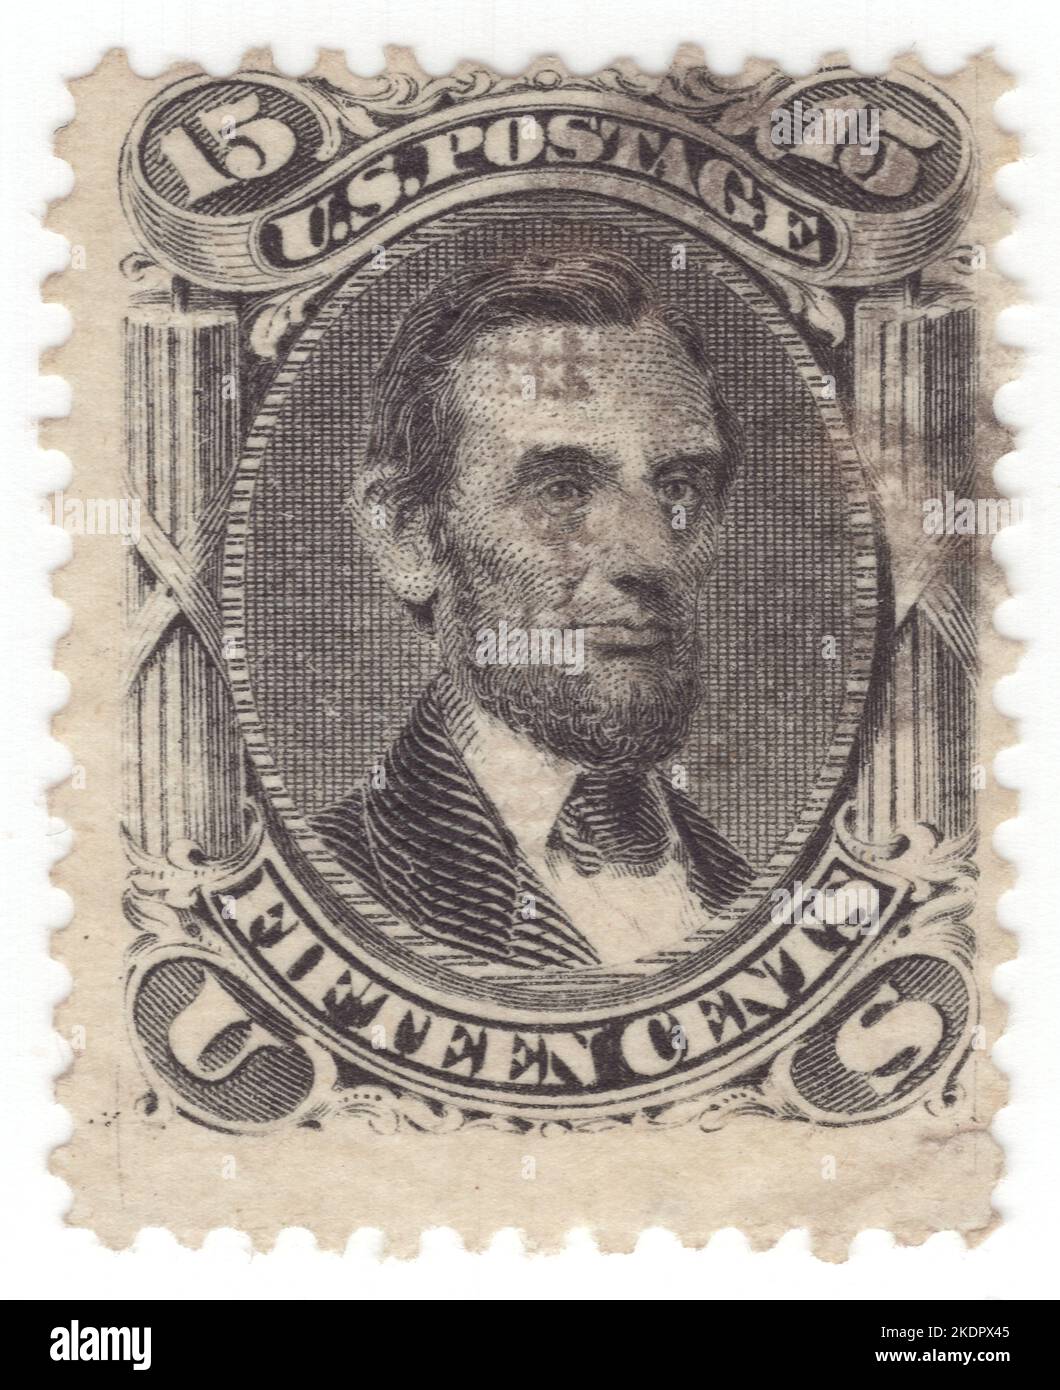 USA - 1861: An 15 cents black postage stamp depicting portrait of Abraham Lincoln. American lawyer and statesman who served as the 16th president of the United States from 1861 until his assassination in 1865. Lincoln led the nation through the American Civil War and succeeded in preserving the Union, abolishing slavery, bolstering the federal government, and modernizing the U.S. economy Stock Photo